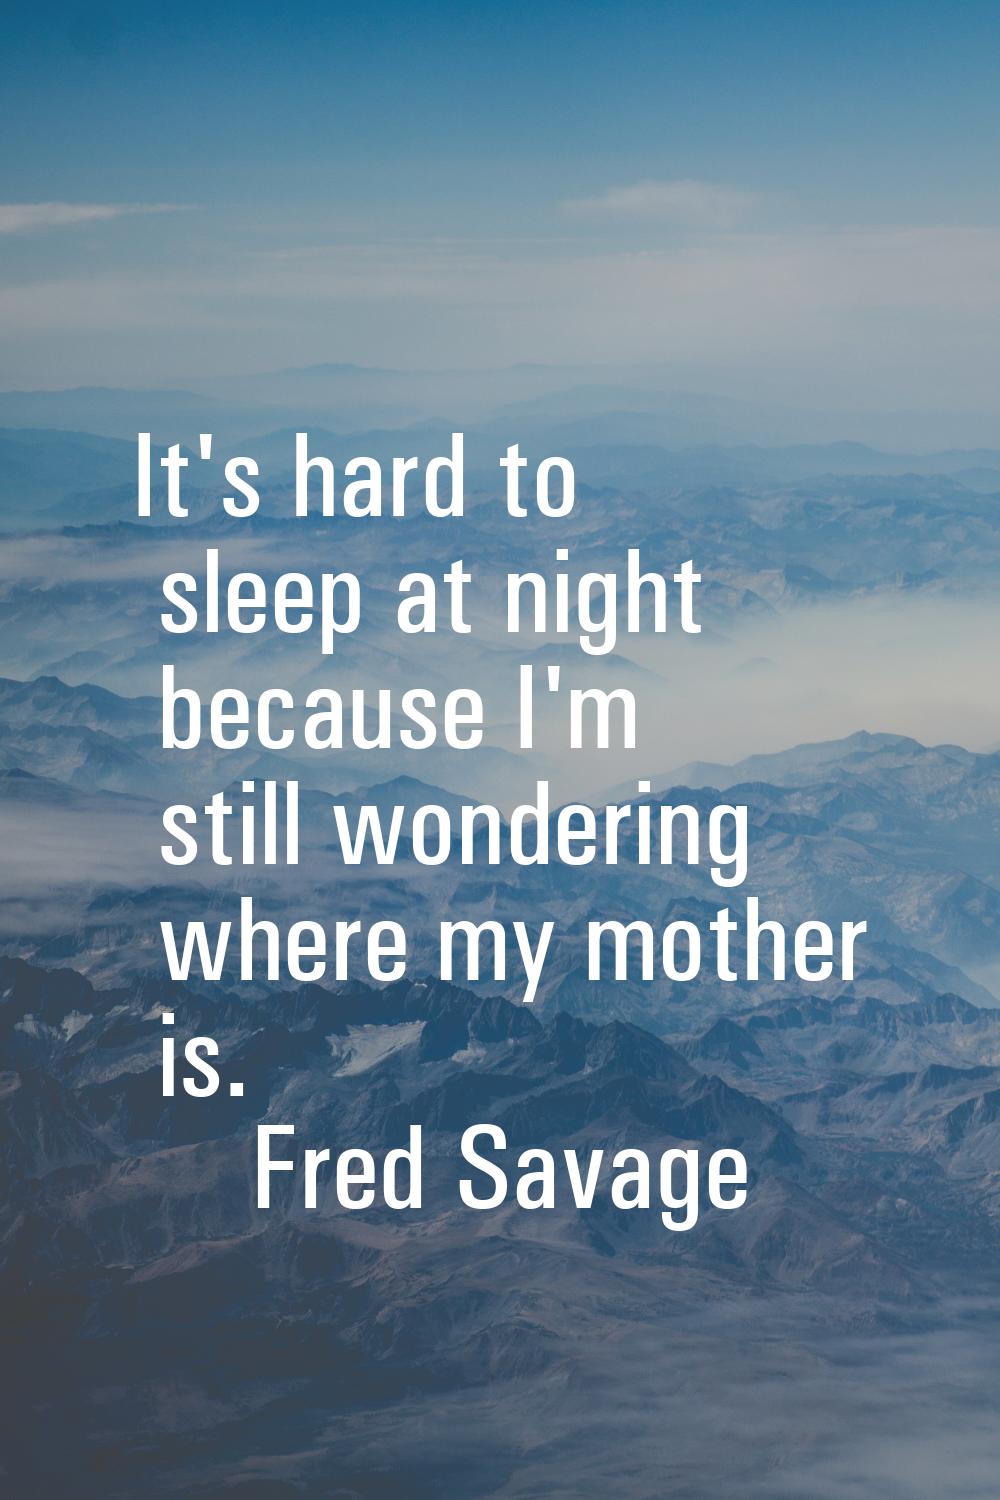 It's hard to sleep at night because I'm still wondering where my mother is.